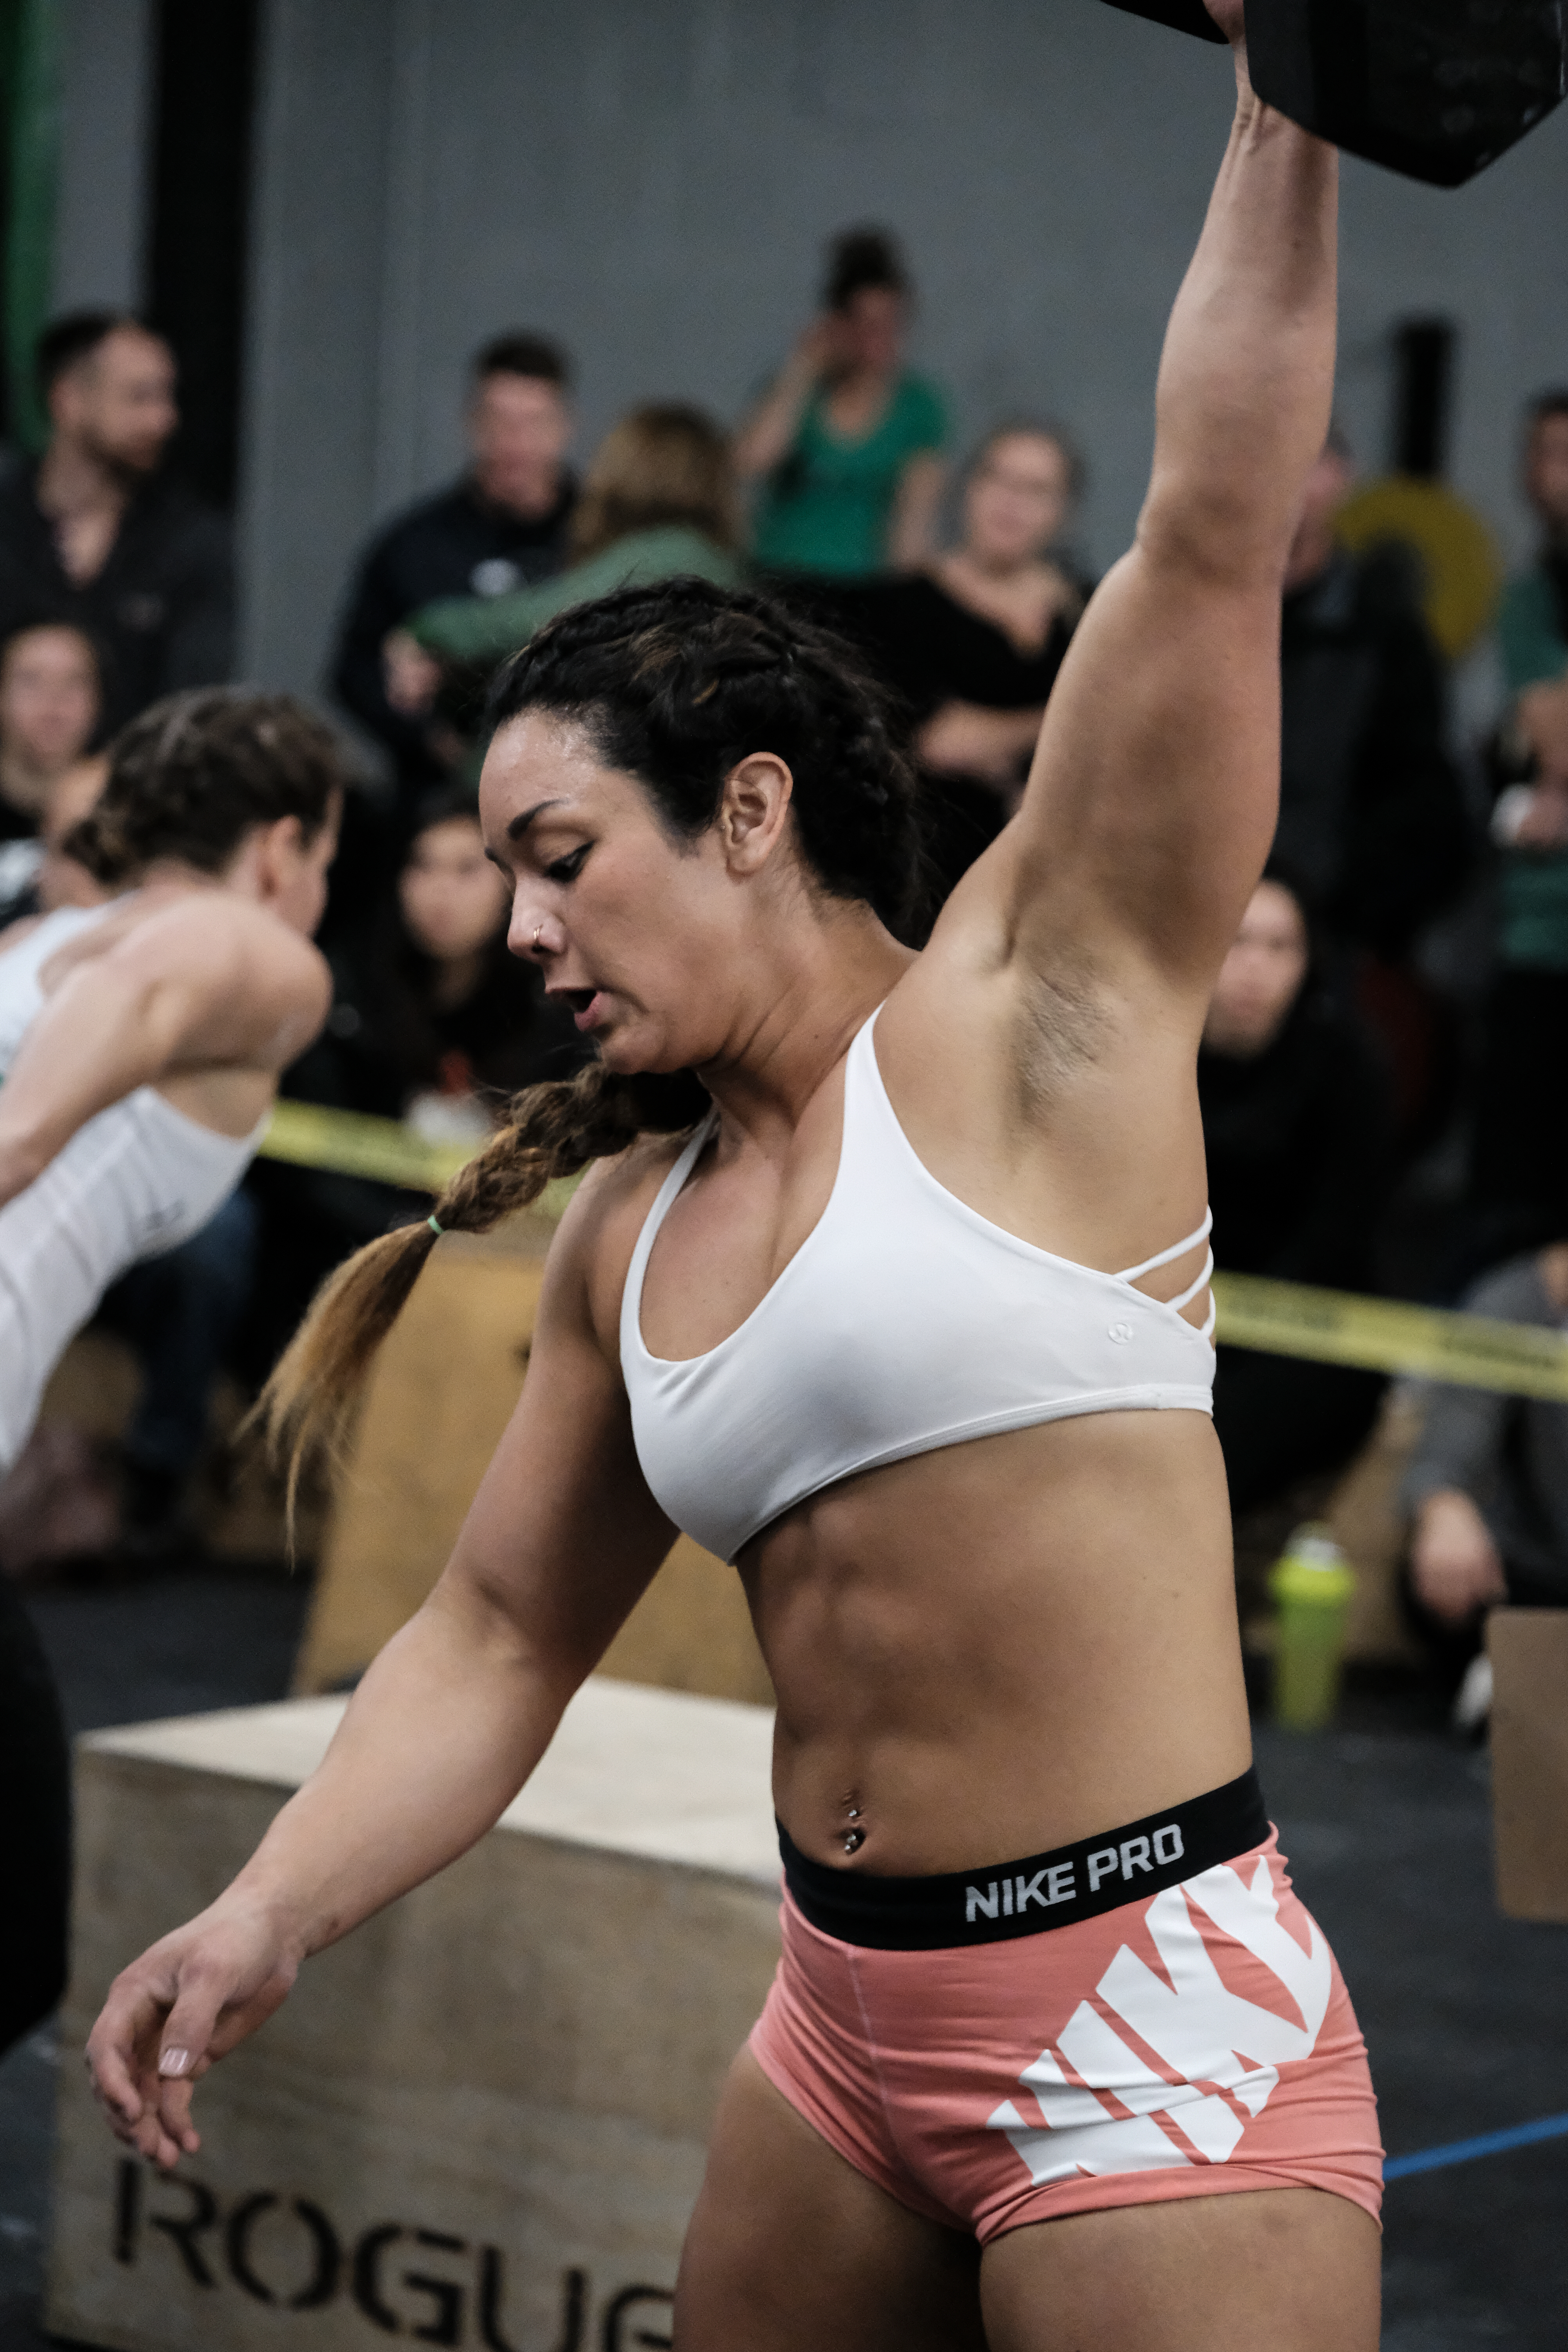 Strong & Beautiful: How Weightlifting Is Improving the Self-Image of Women  - Invictus Fitness